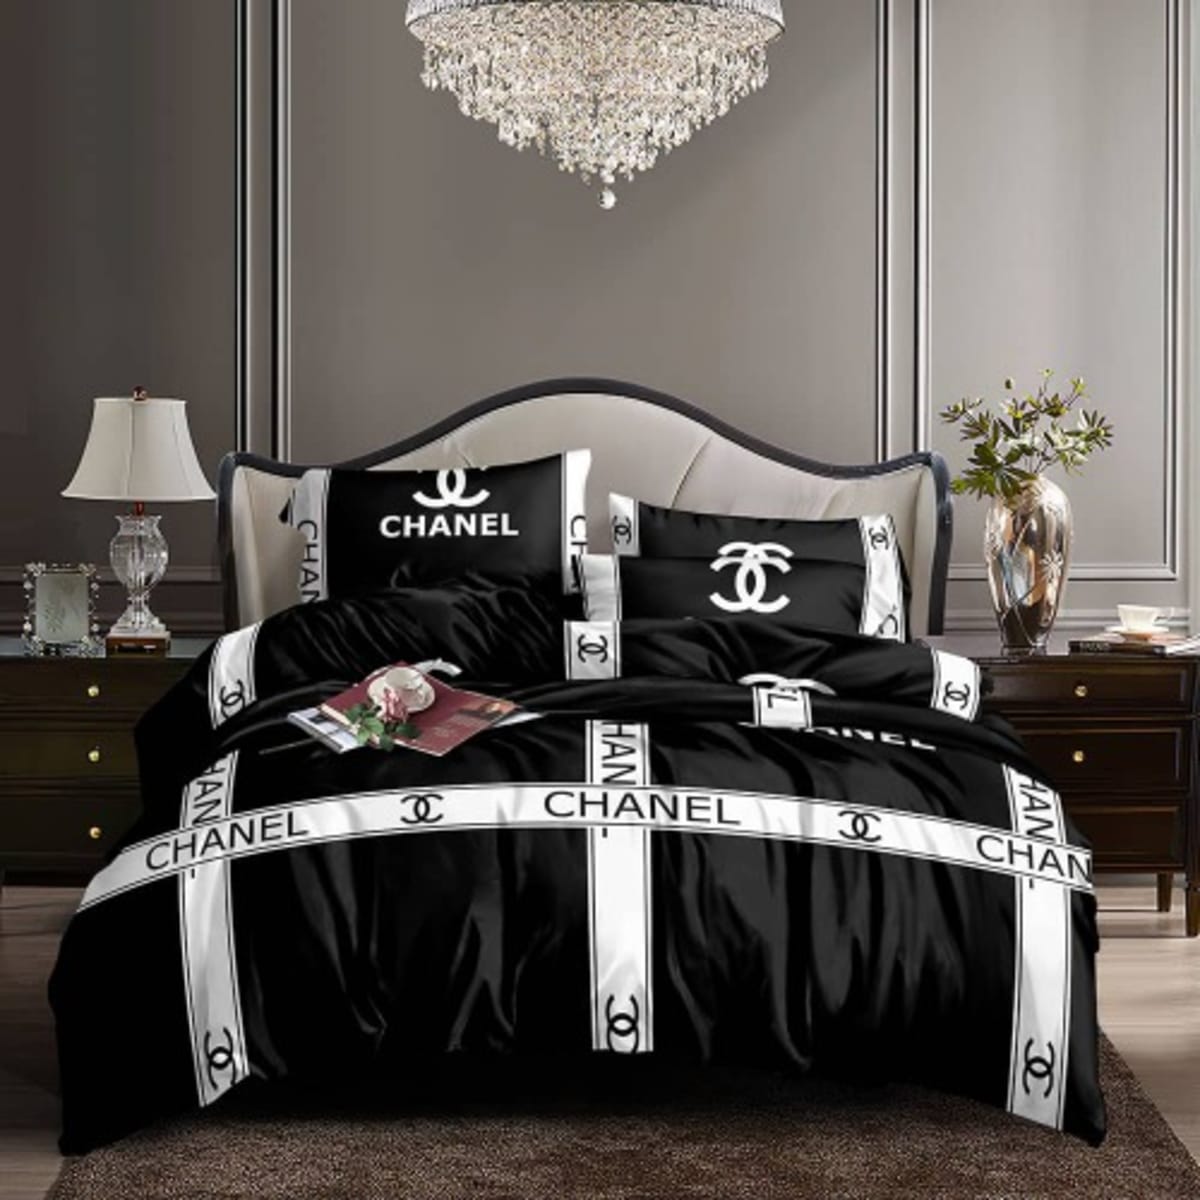 I Don't Care What You Think Of Me Coco Chanel Inspired Throw